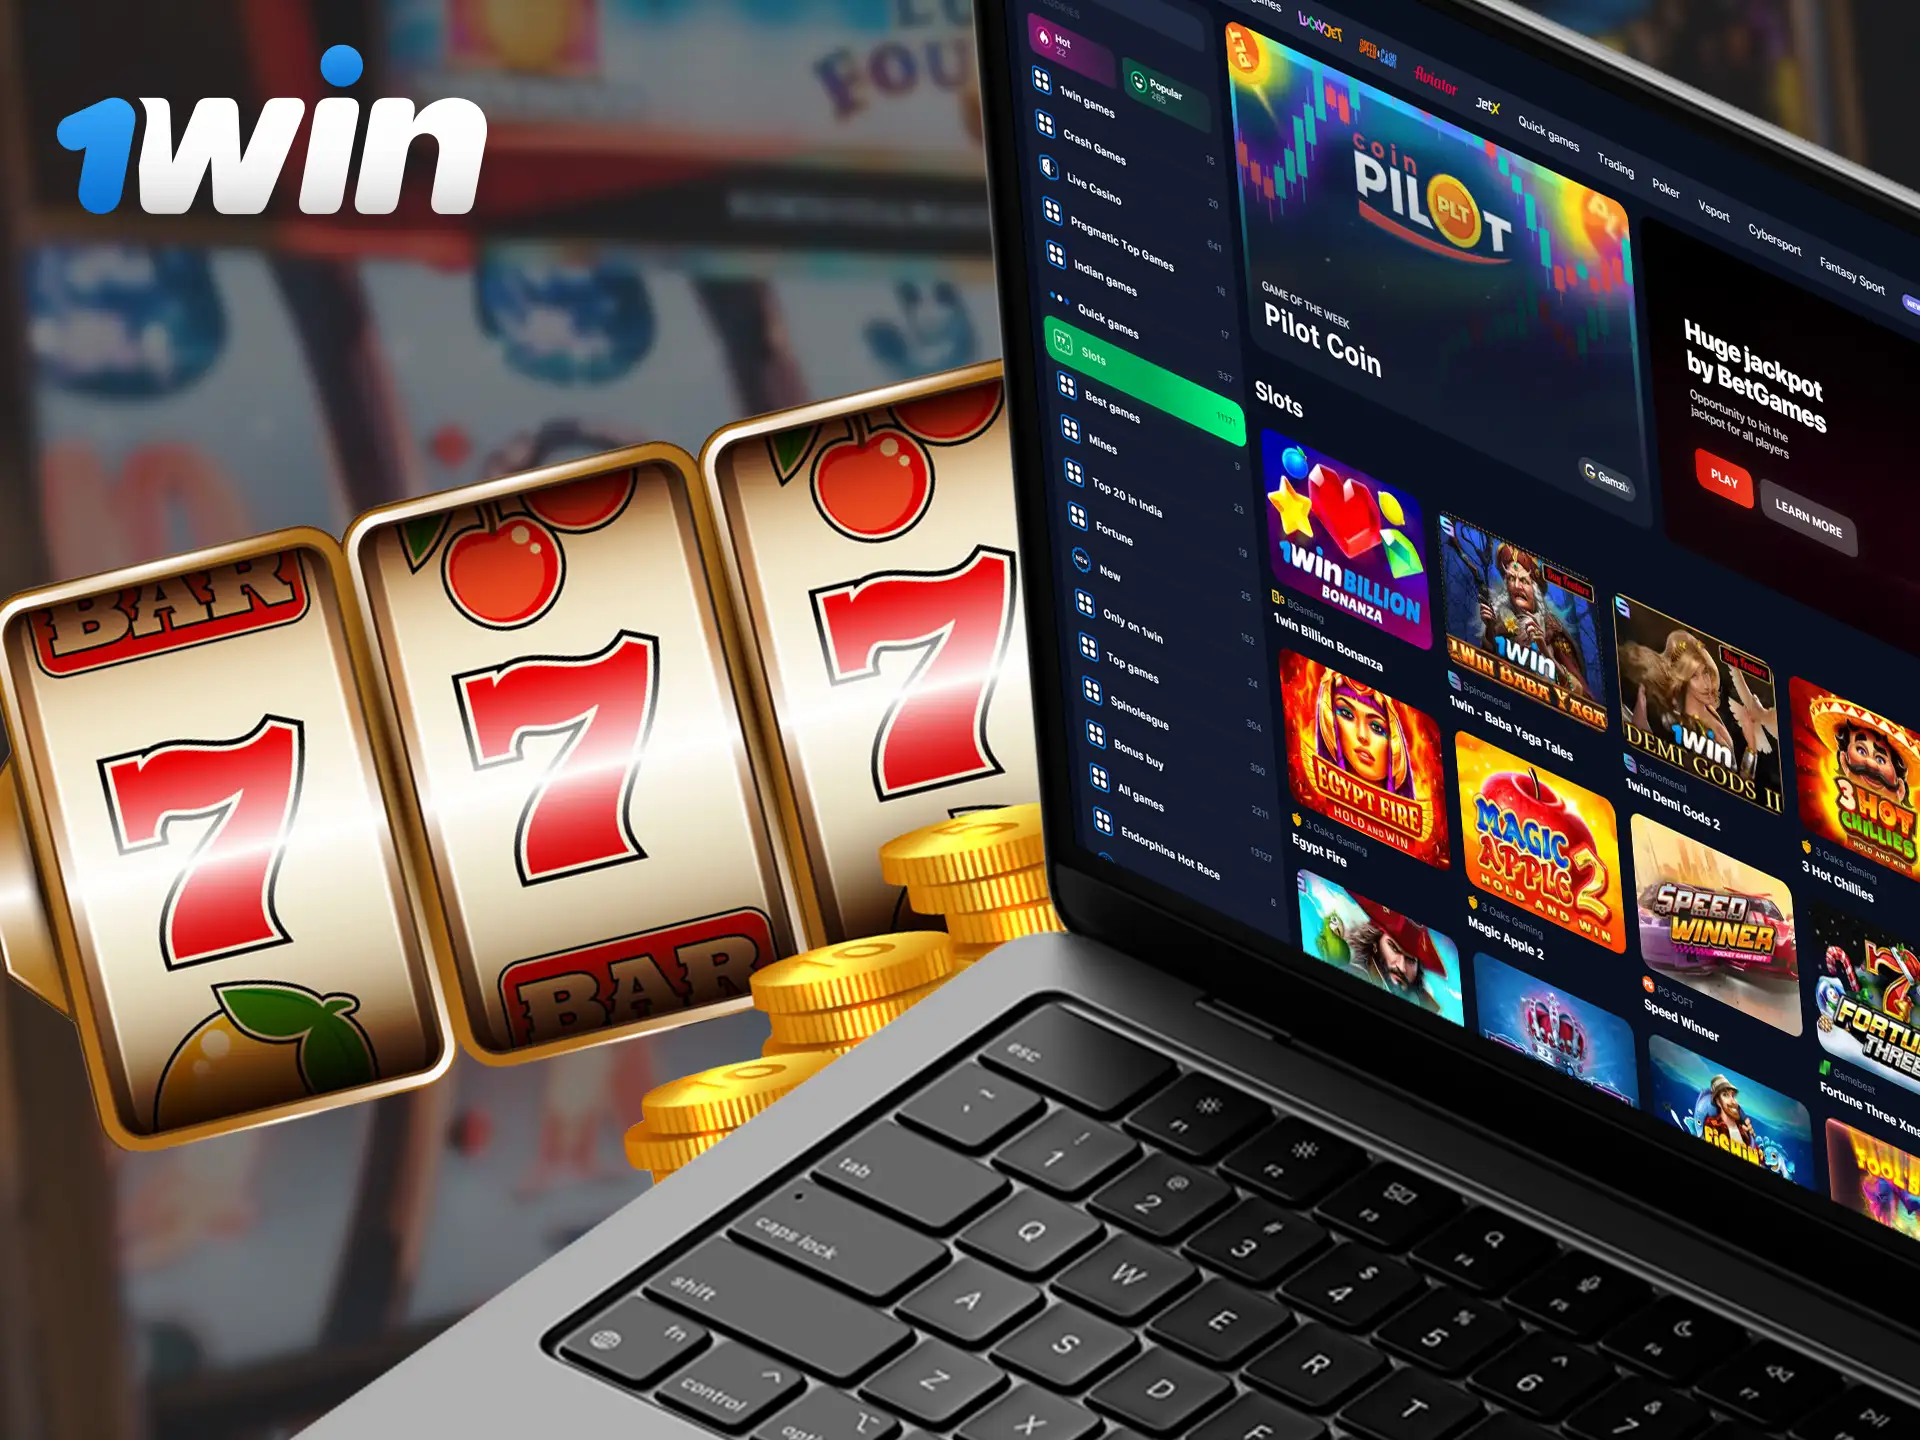 Players can enjoy a great selection of slot machines at 1Win Casino.